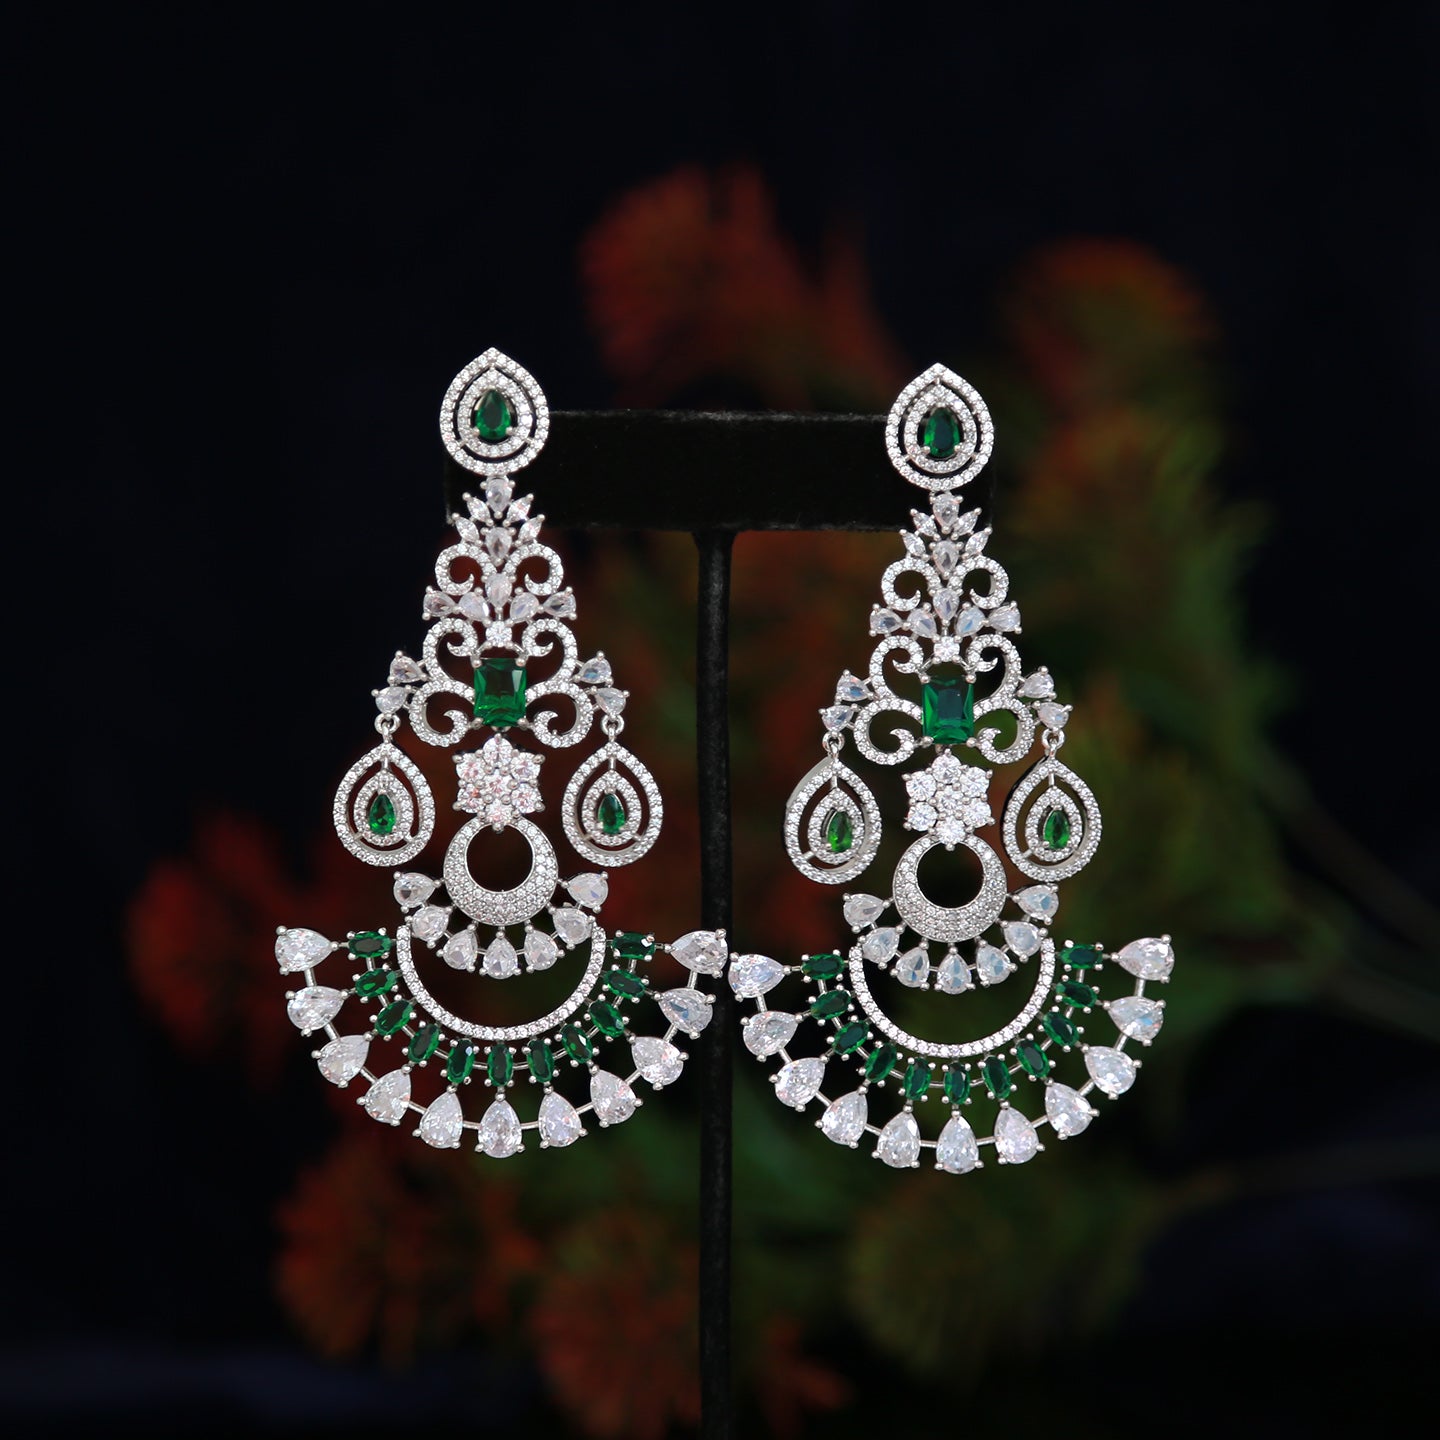 Silver American Diamond Chandbali Earrings | Traditional Ethnic Party wear Earrings |High Quality Indian Jewelry Earrings | Gift for Her